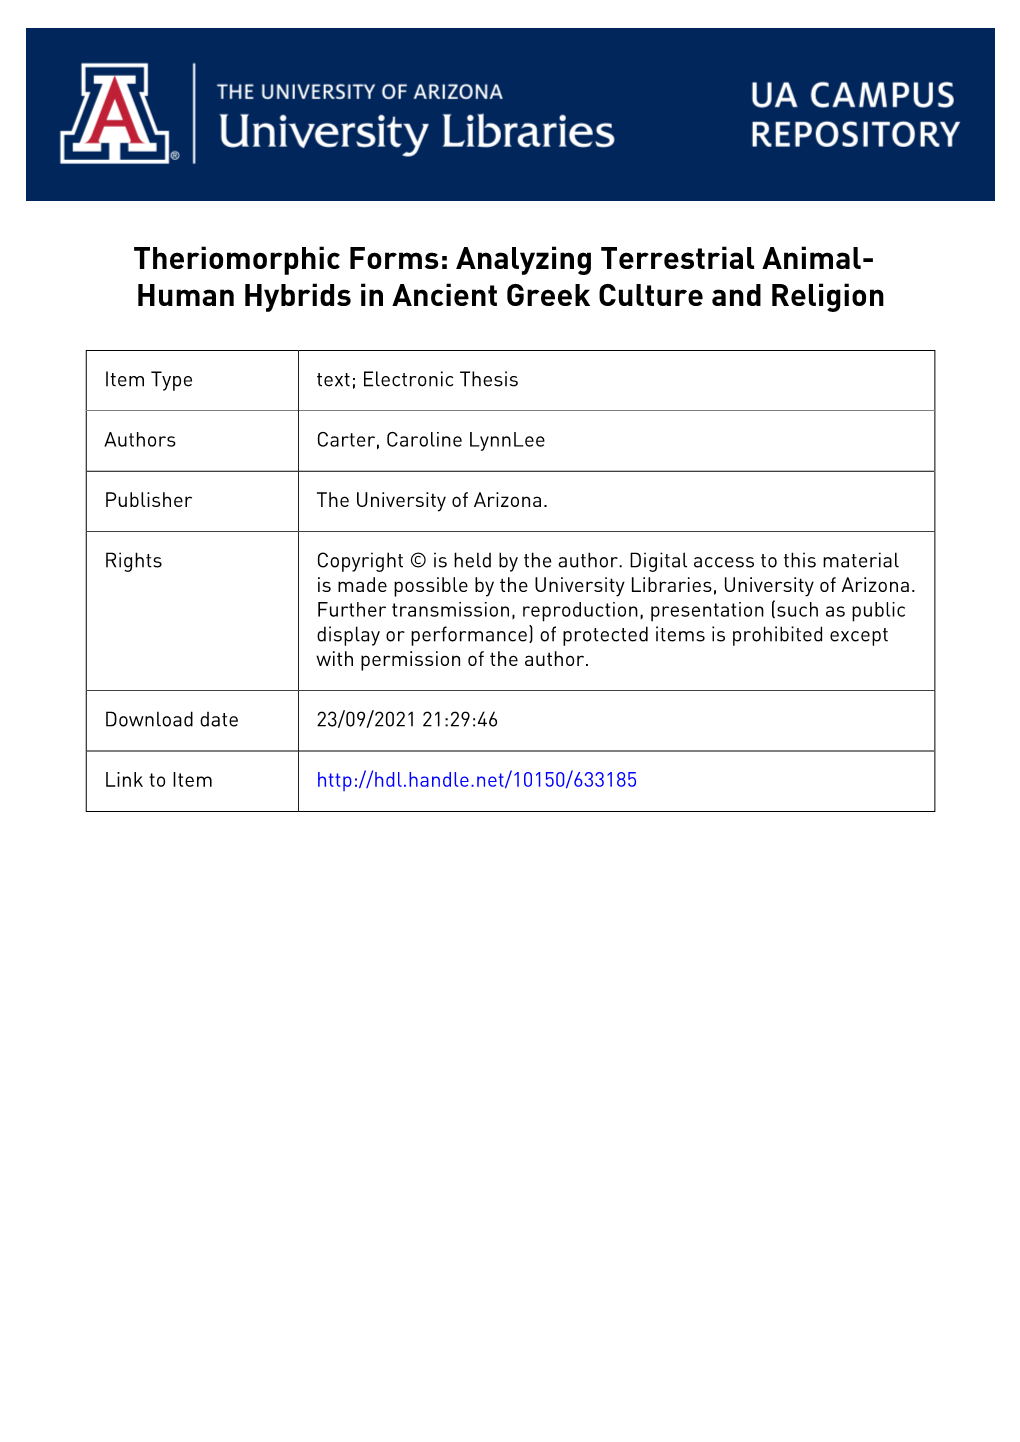 Theriomorphic Forms: Analyzing Terrestrial Animal- Human Hybrids in Ancient Greek Culture and Religion